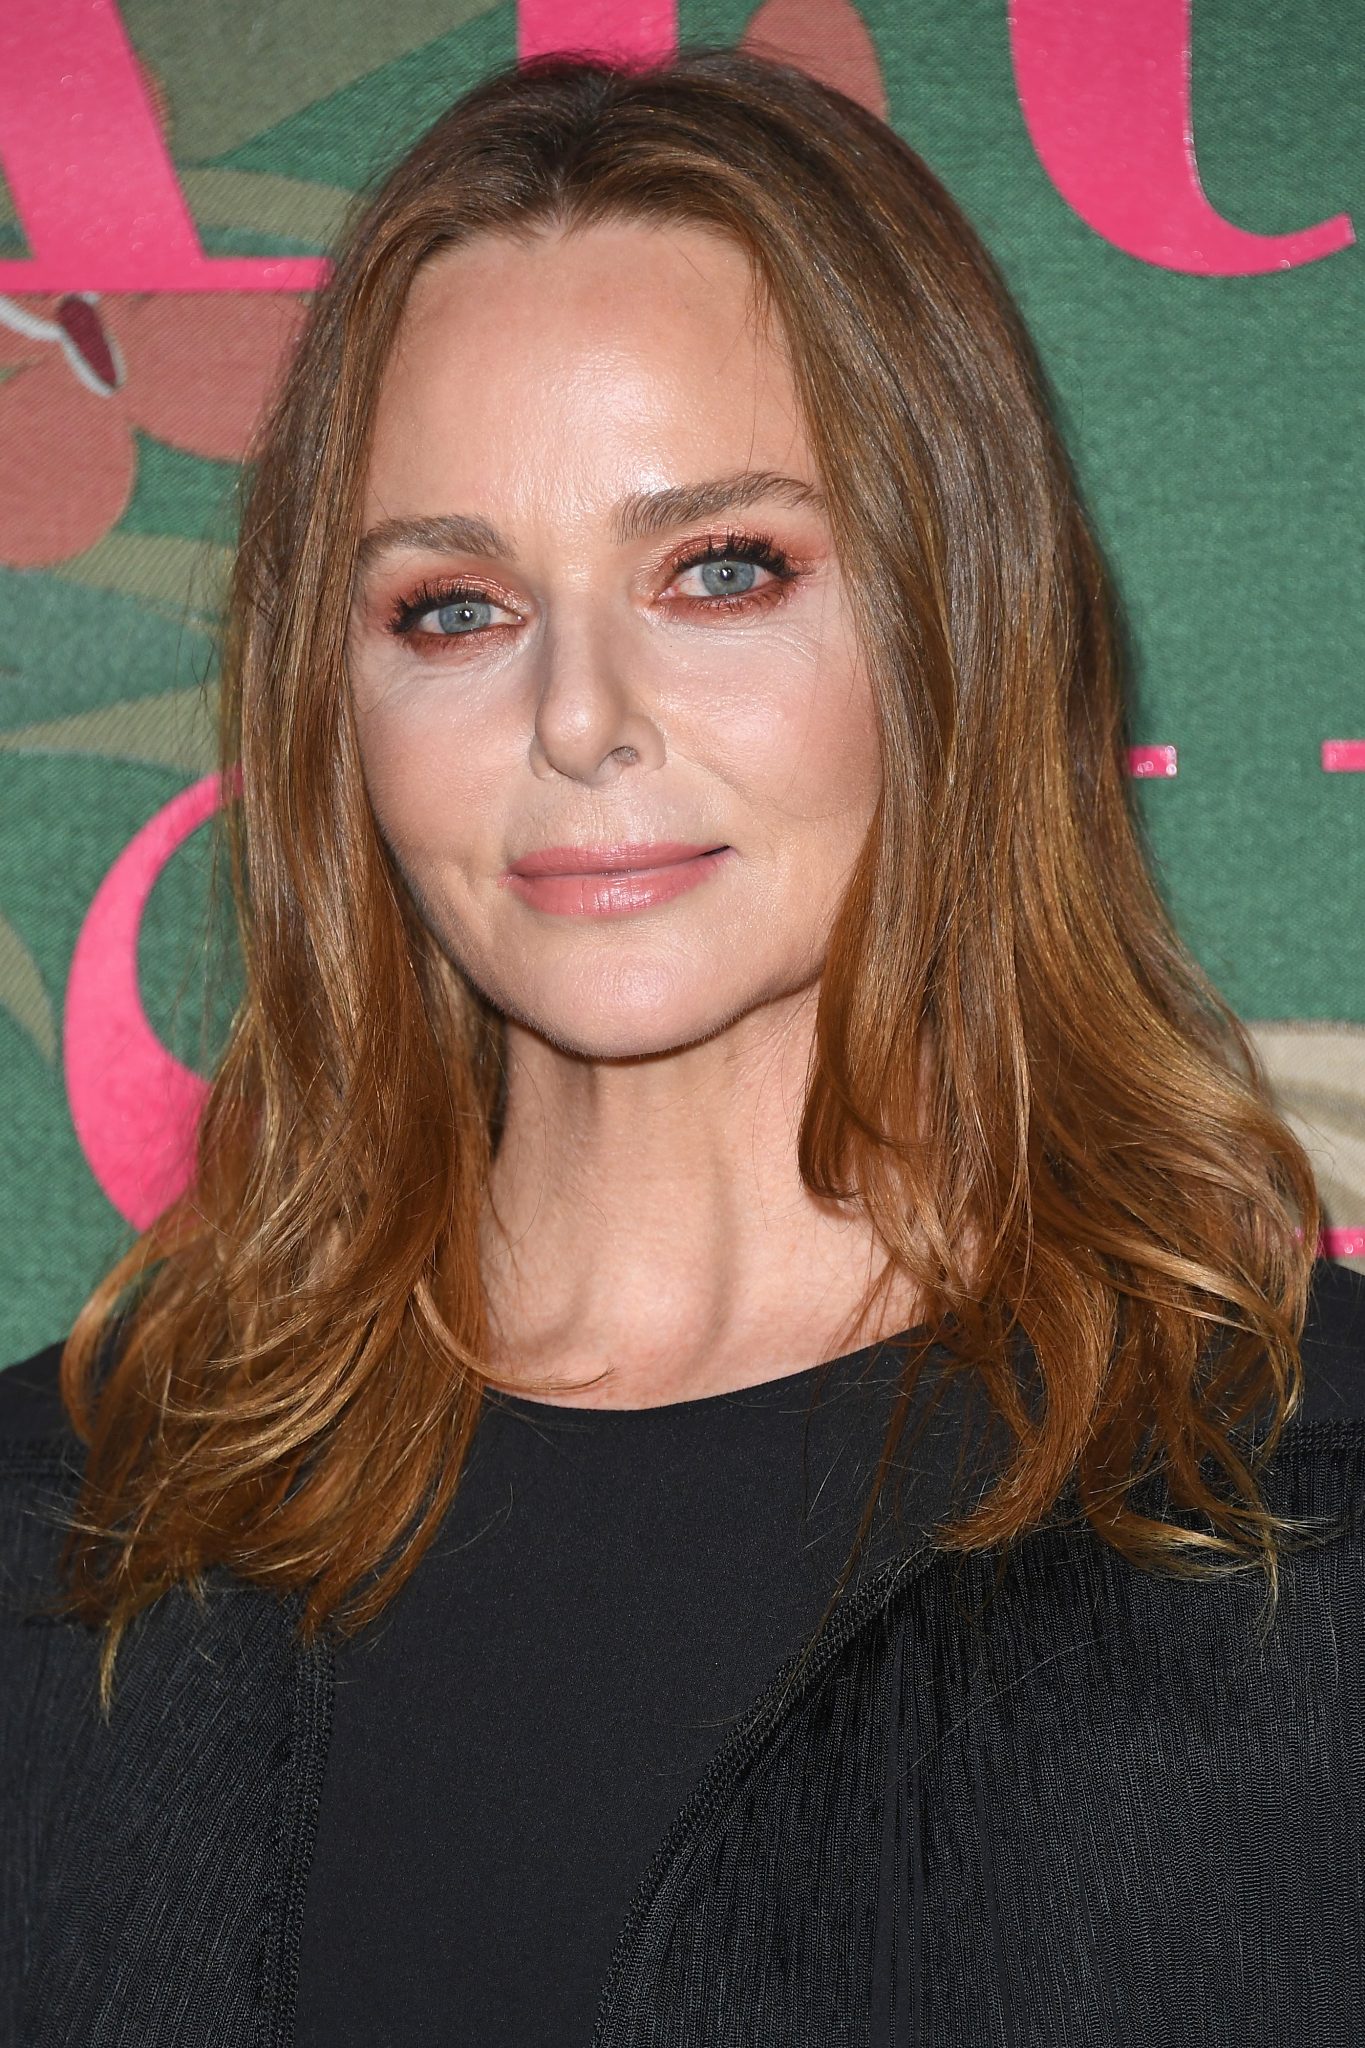 Stella McCartney hosts online festival for domestic abuse charity